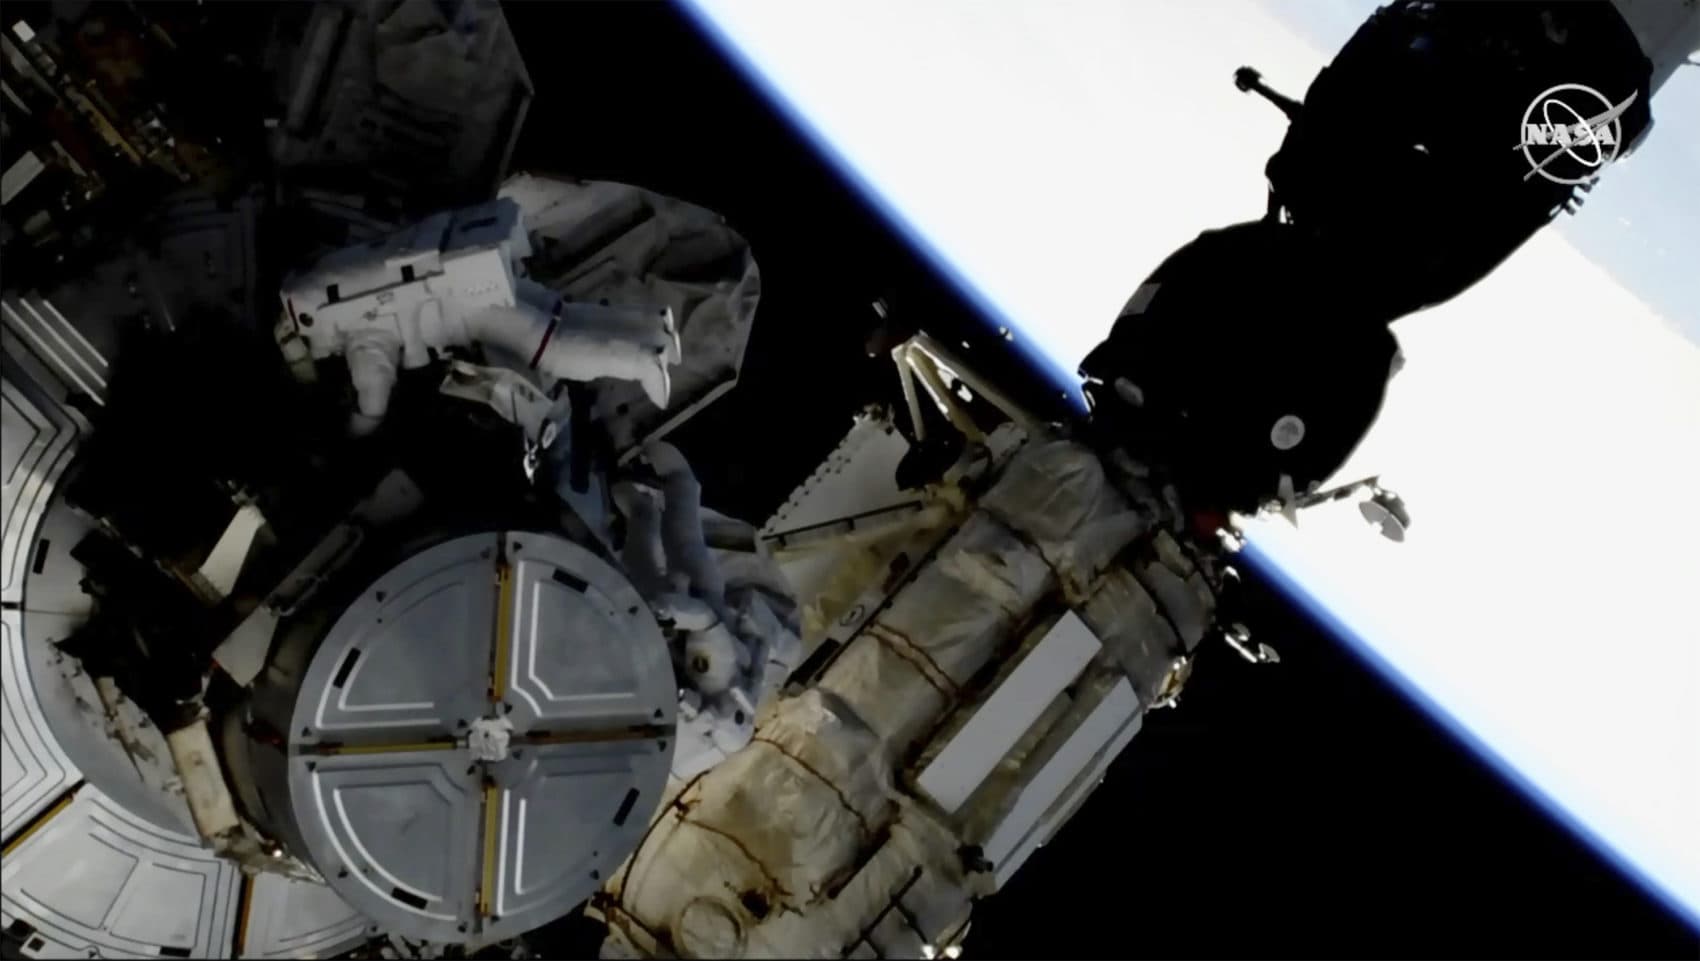 This image provided by NASA shows astronauts Anne McClain and Nick Hague taking a spacewalk to replace aging batteries on the International Space Station on Friday, March 22, 2019. (NASA via AP)